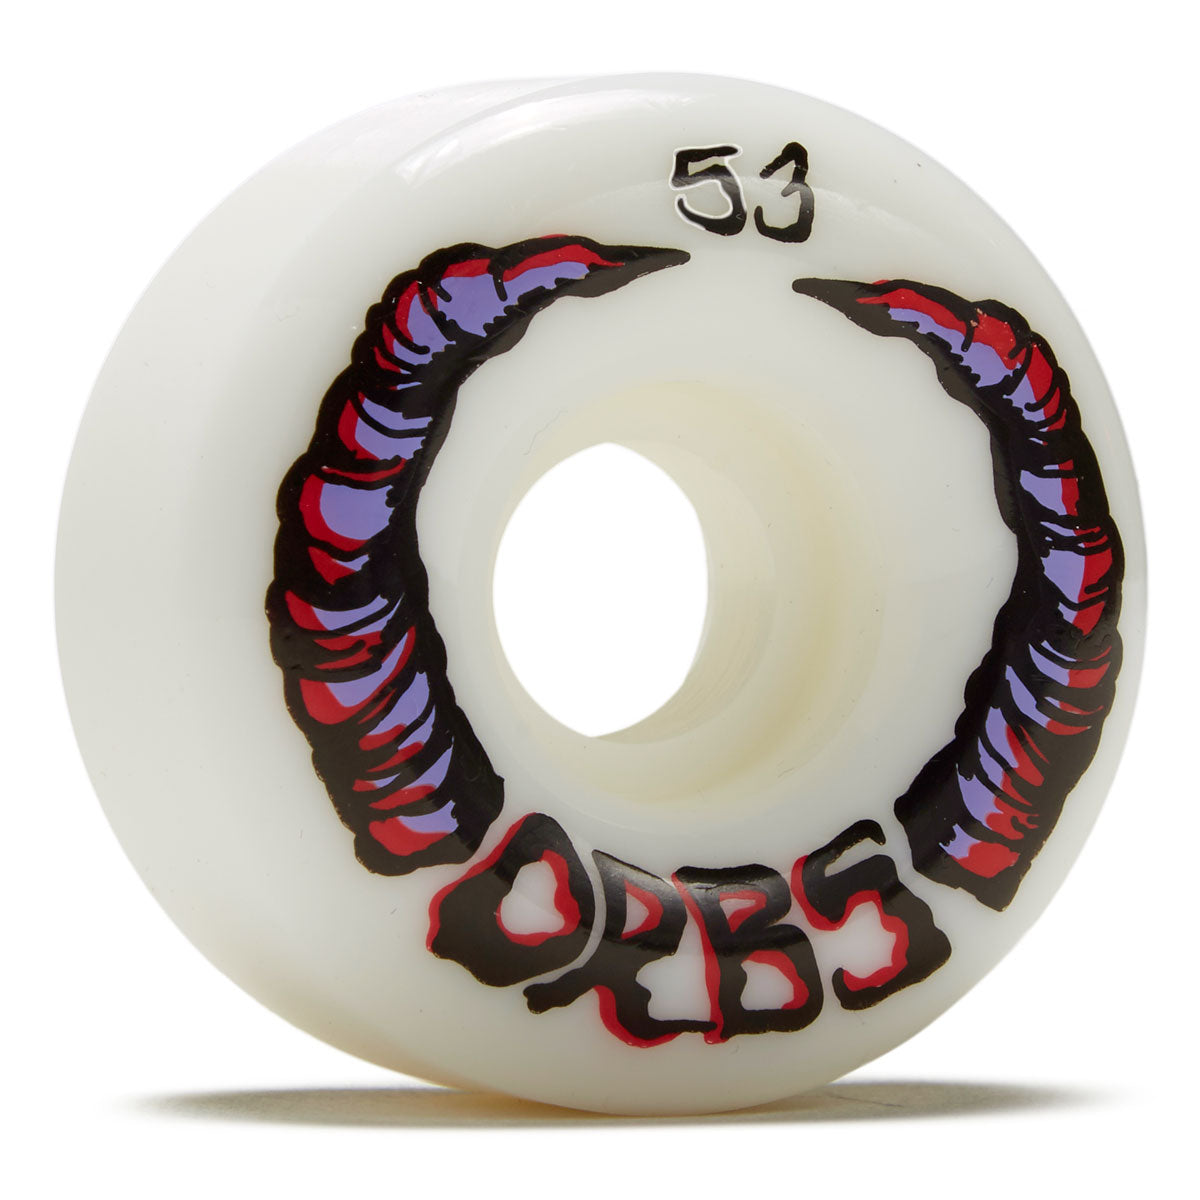 Welcome Orbs Apparitions Round 99A Skateboard Wheels - White - 53mm